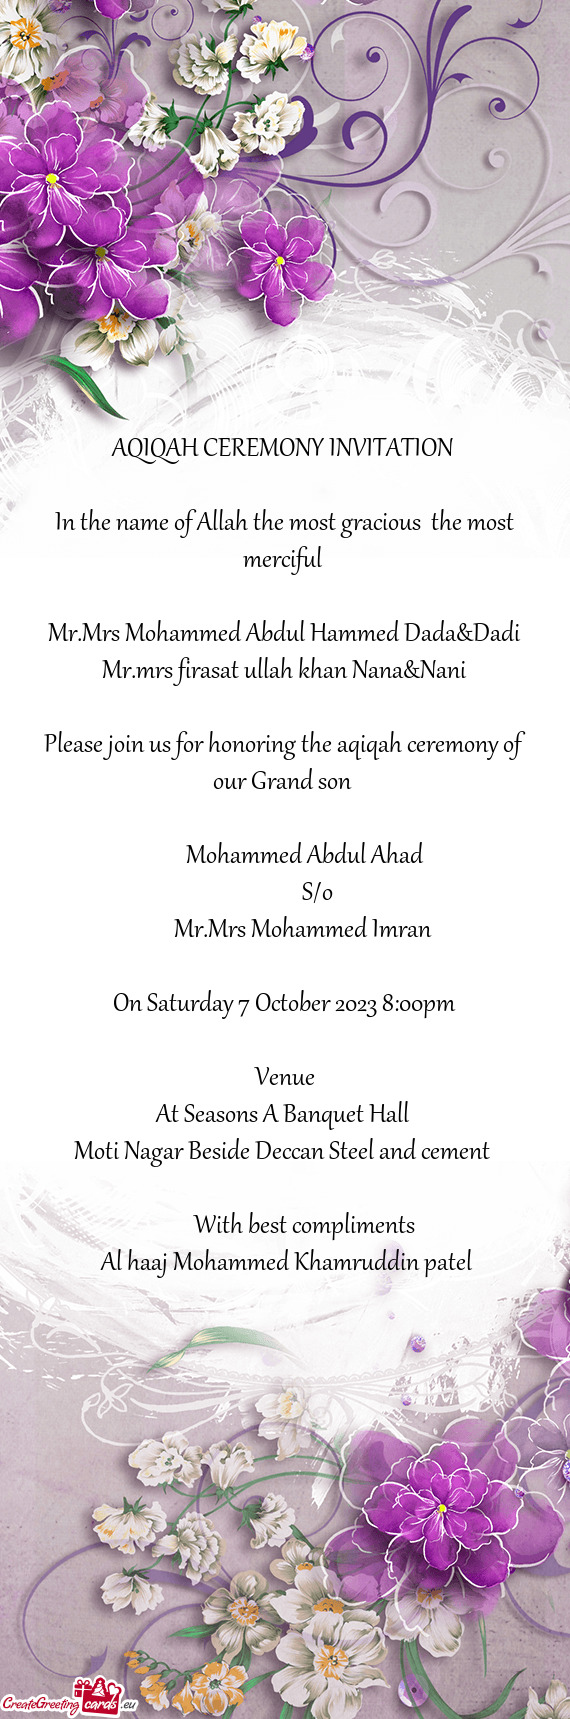 Please join us for honoring the aqiqah ceremony of our Grand son